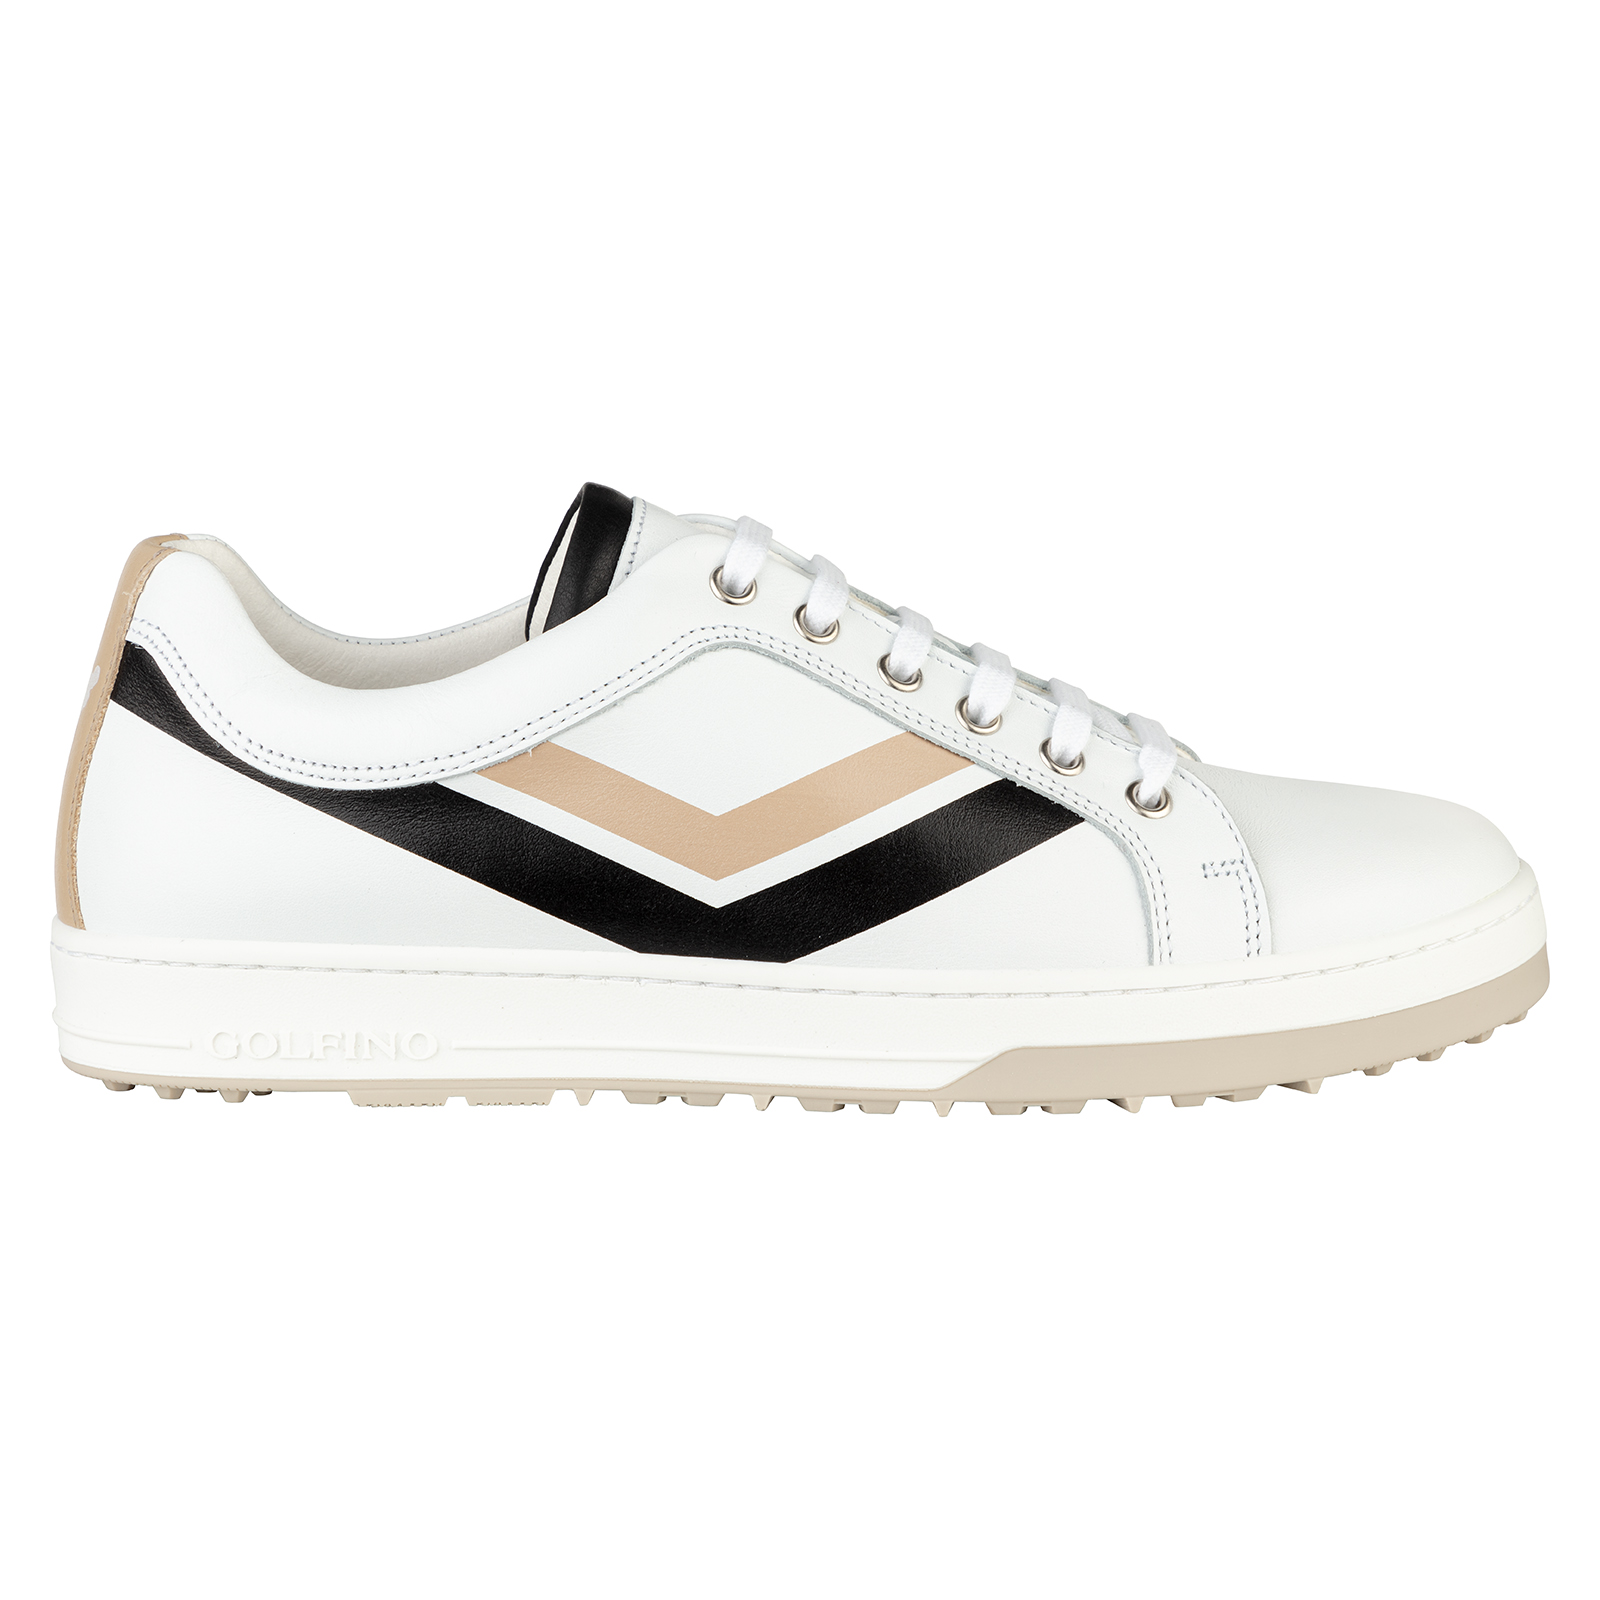 Ladies' stylish water-repellent genuine leather golf shoes